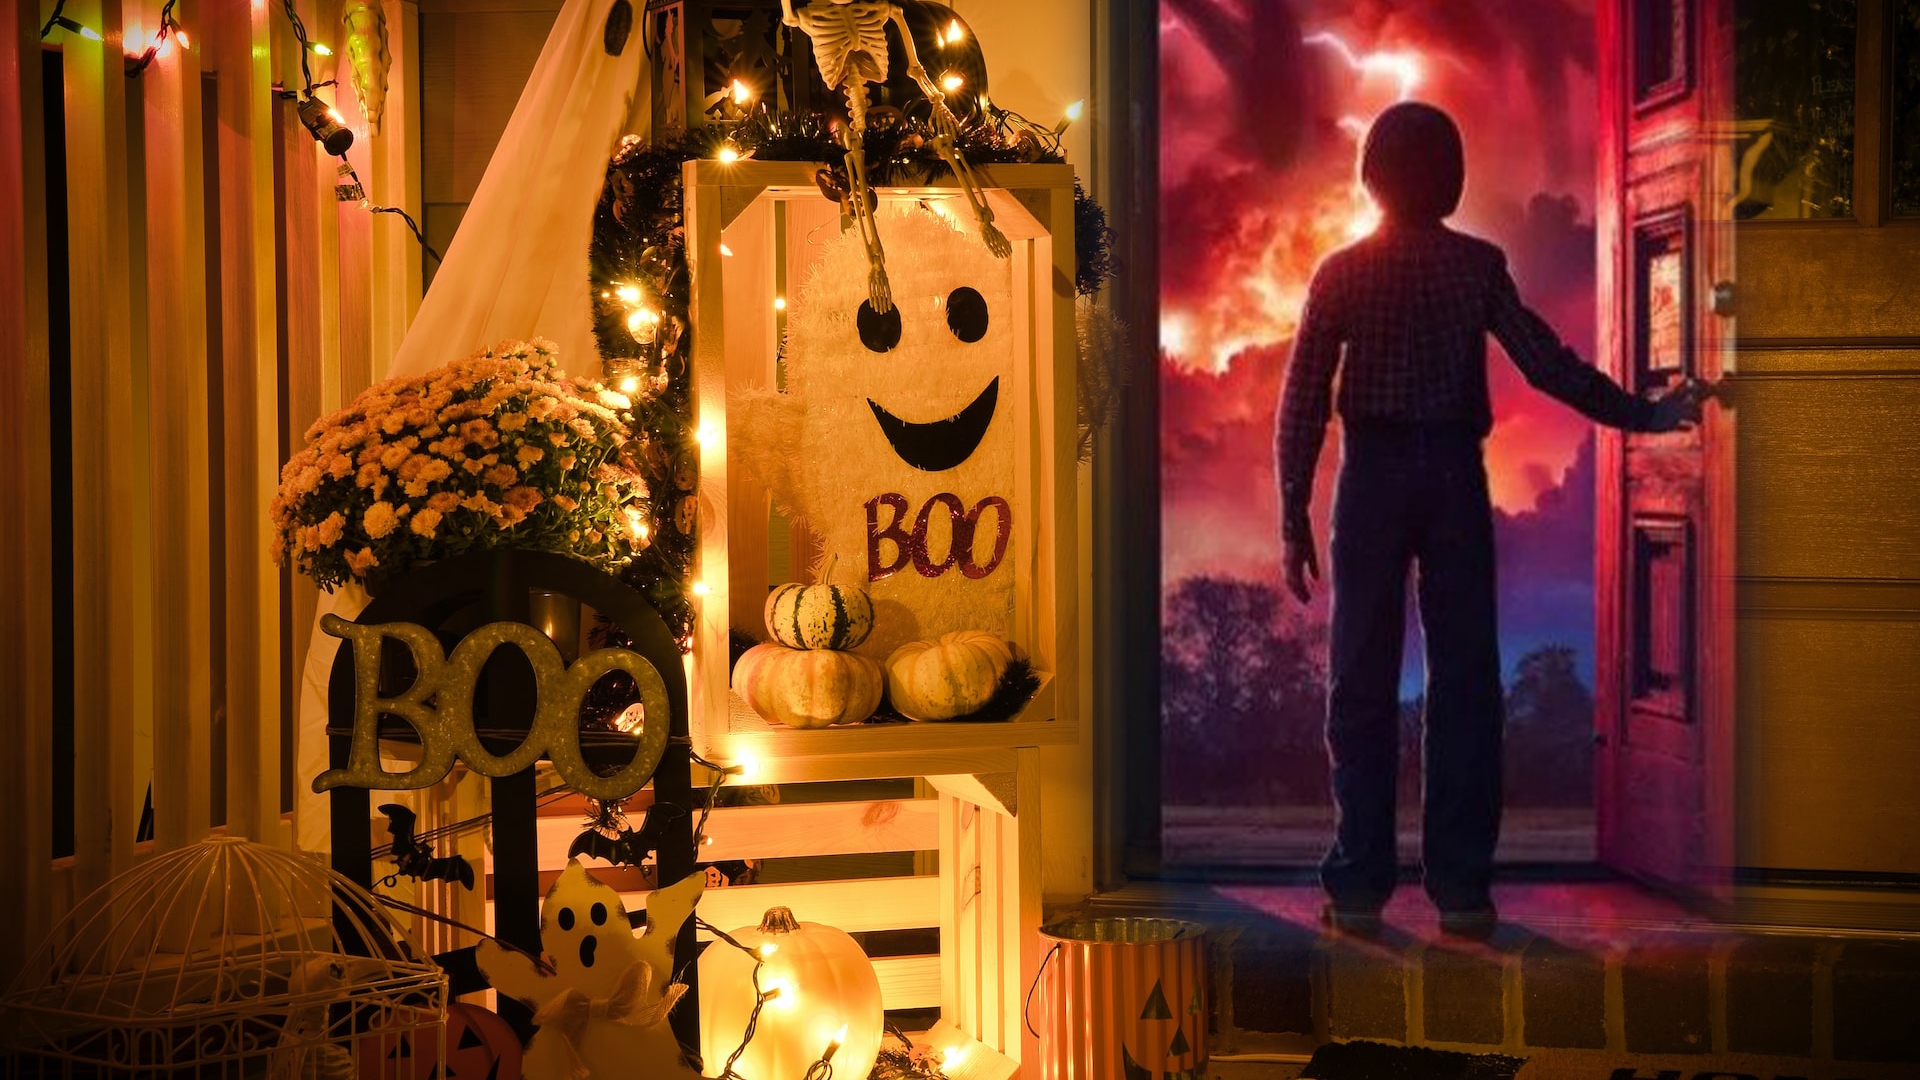 The Ultimate Stranger Things Halloween Theme Guide + FREE Printables!